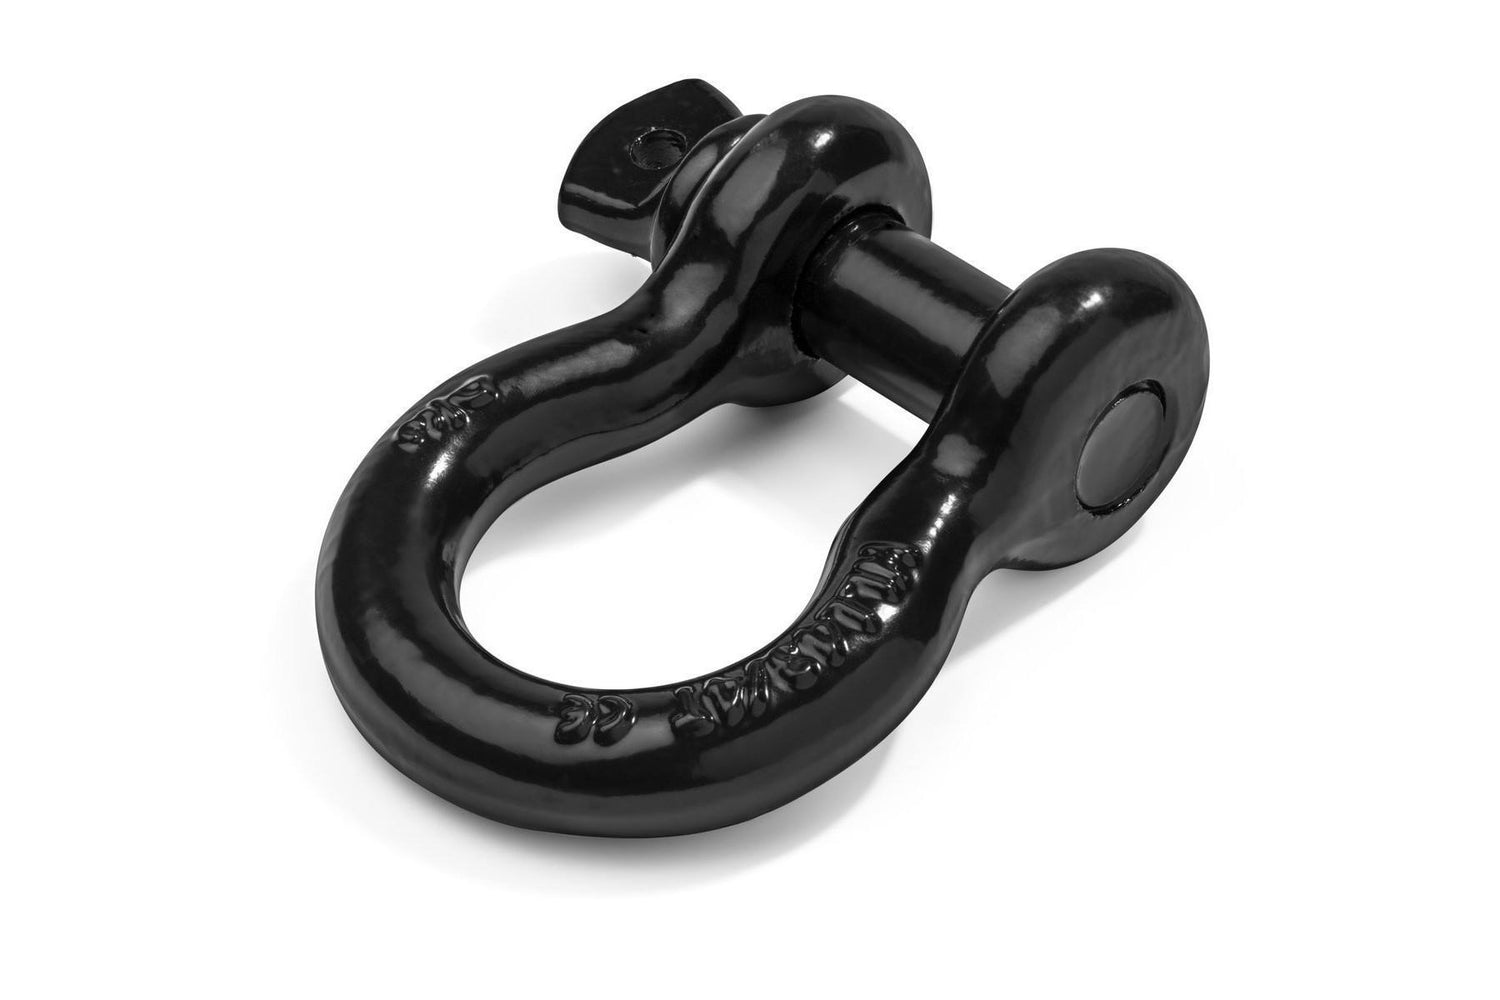 3/4" Shackles - 2 Pack - Anti Rust Black Powder Coat - Rugged 4.75 Ton (9,500 Lbs) Capacity - Heavy Duty D Ring for Vehicle Recovery, Towing, Stump Removal, & More - Accessory for Jeeps & Trucks - BumperOnly